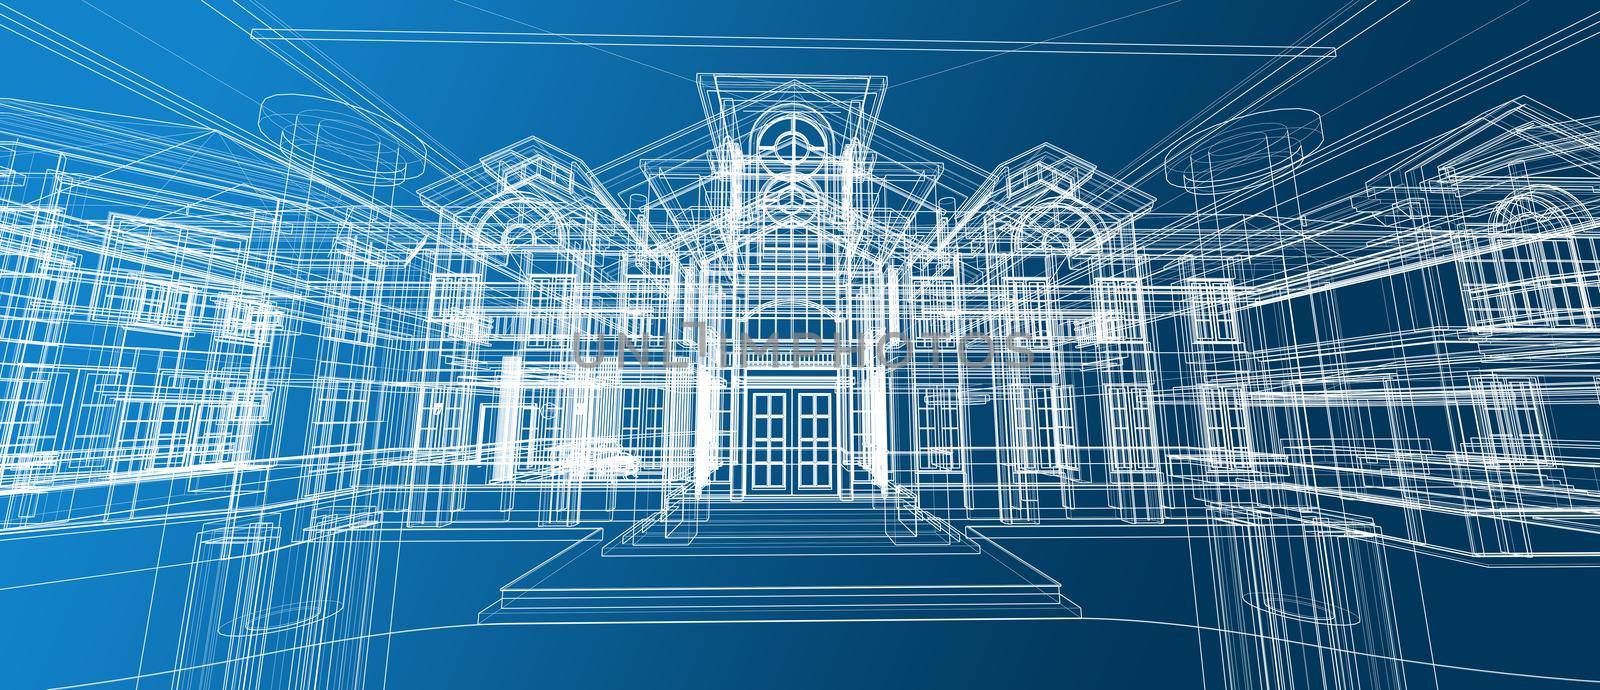 Architecture house space design concept 3d perspective wireframe rendering over blue background. For abstract background or wallpaper desktops computer smart technology design architectural theme